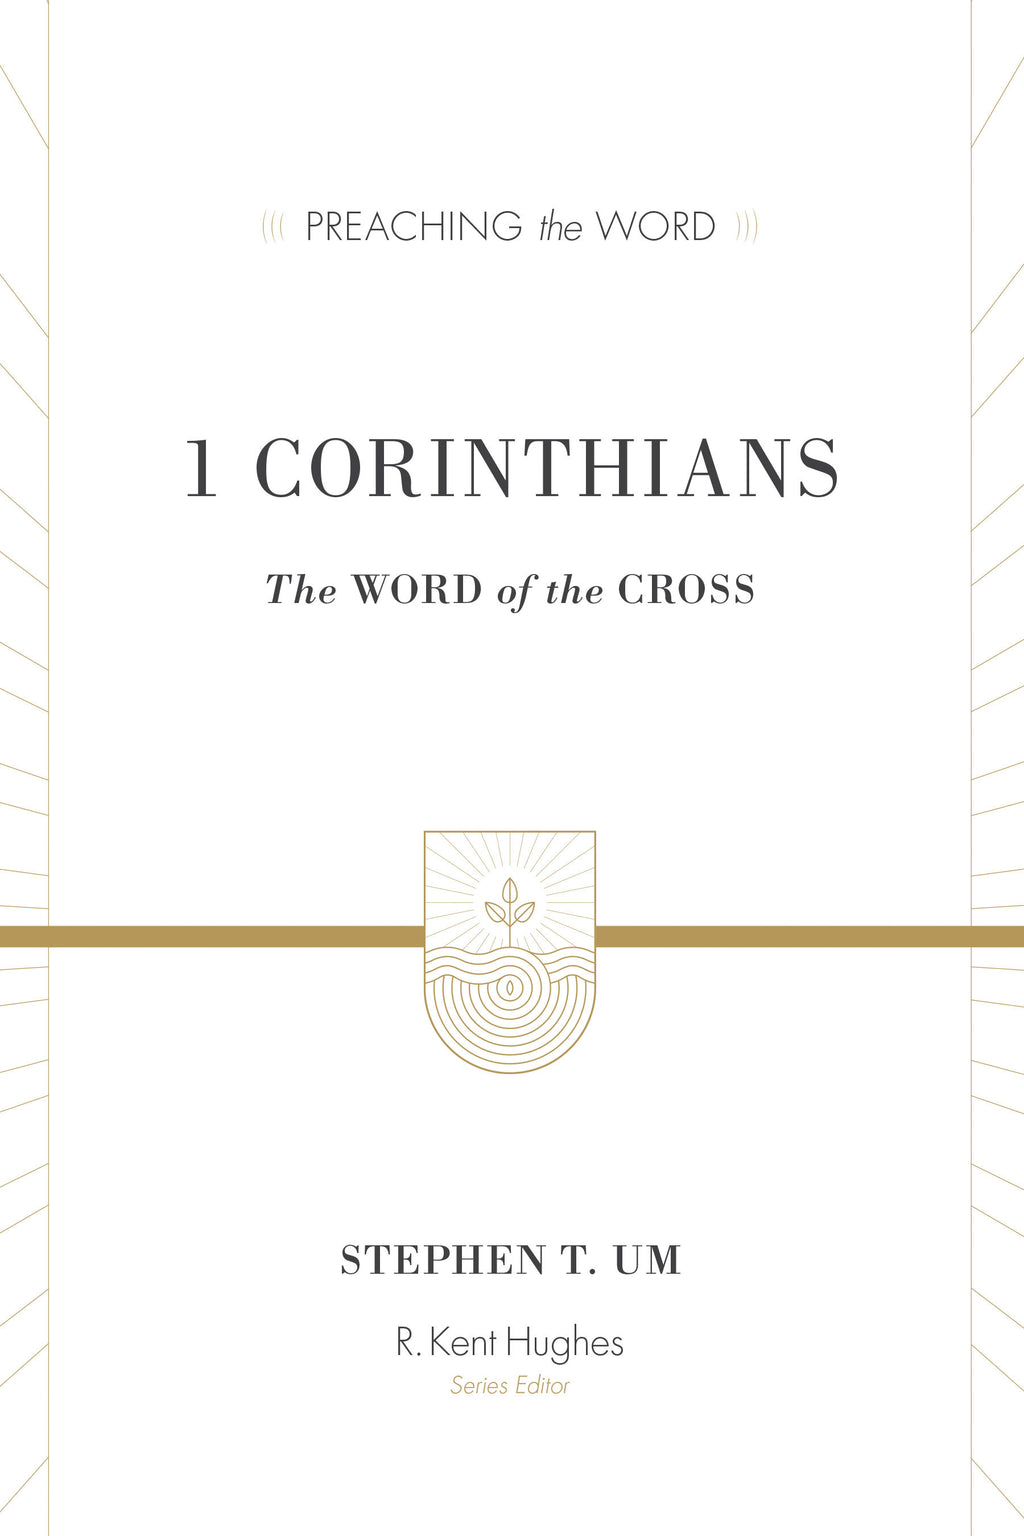 Corinthians:　Stephen　Westminster　T　The　Word　the　(Preaching　of　–　the　Bookstore　Cross　Word)　Um,　9781433512001